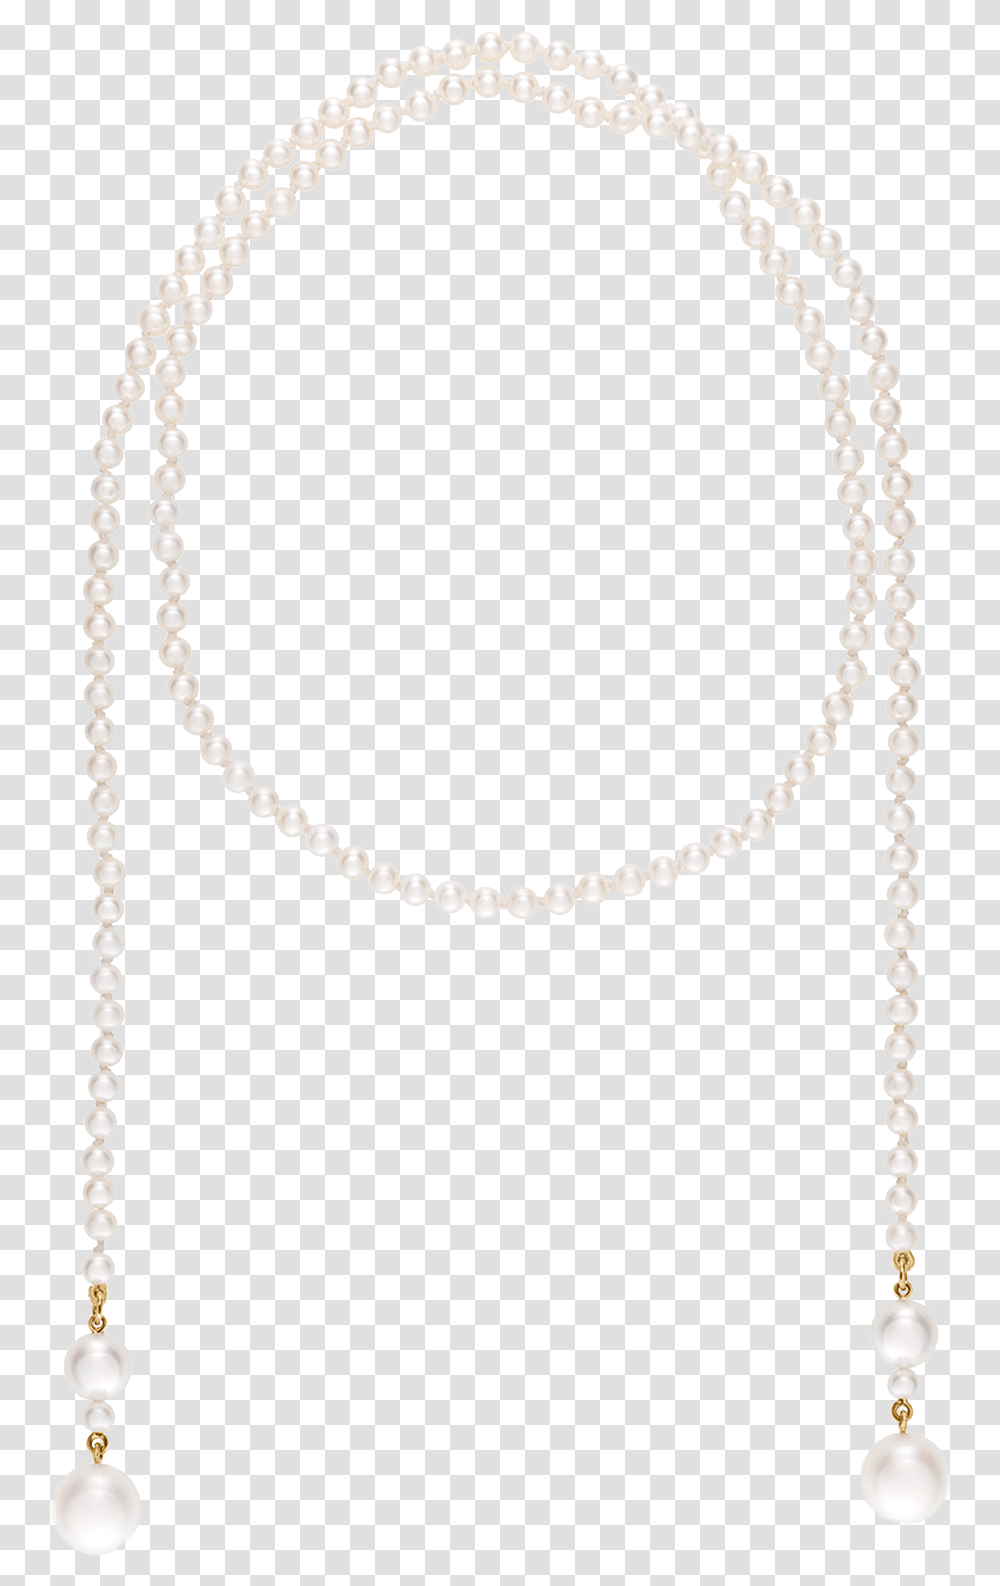 Chain, Bead Necklace, Jewelry, Ornament, Accessories Transparent Png